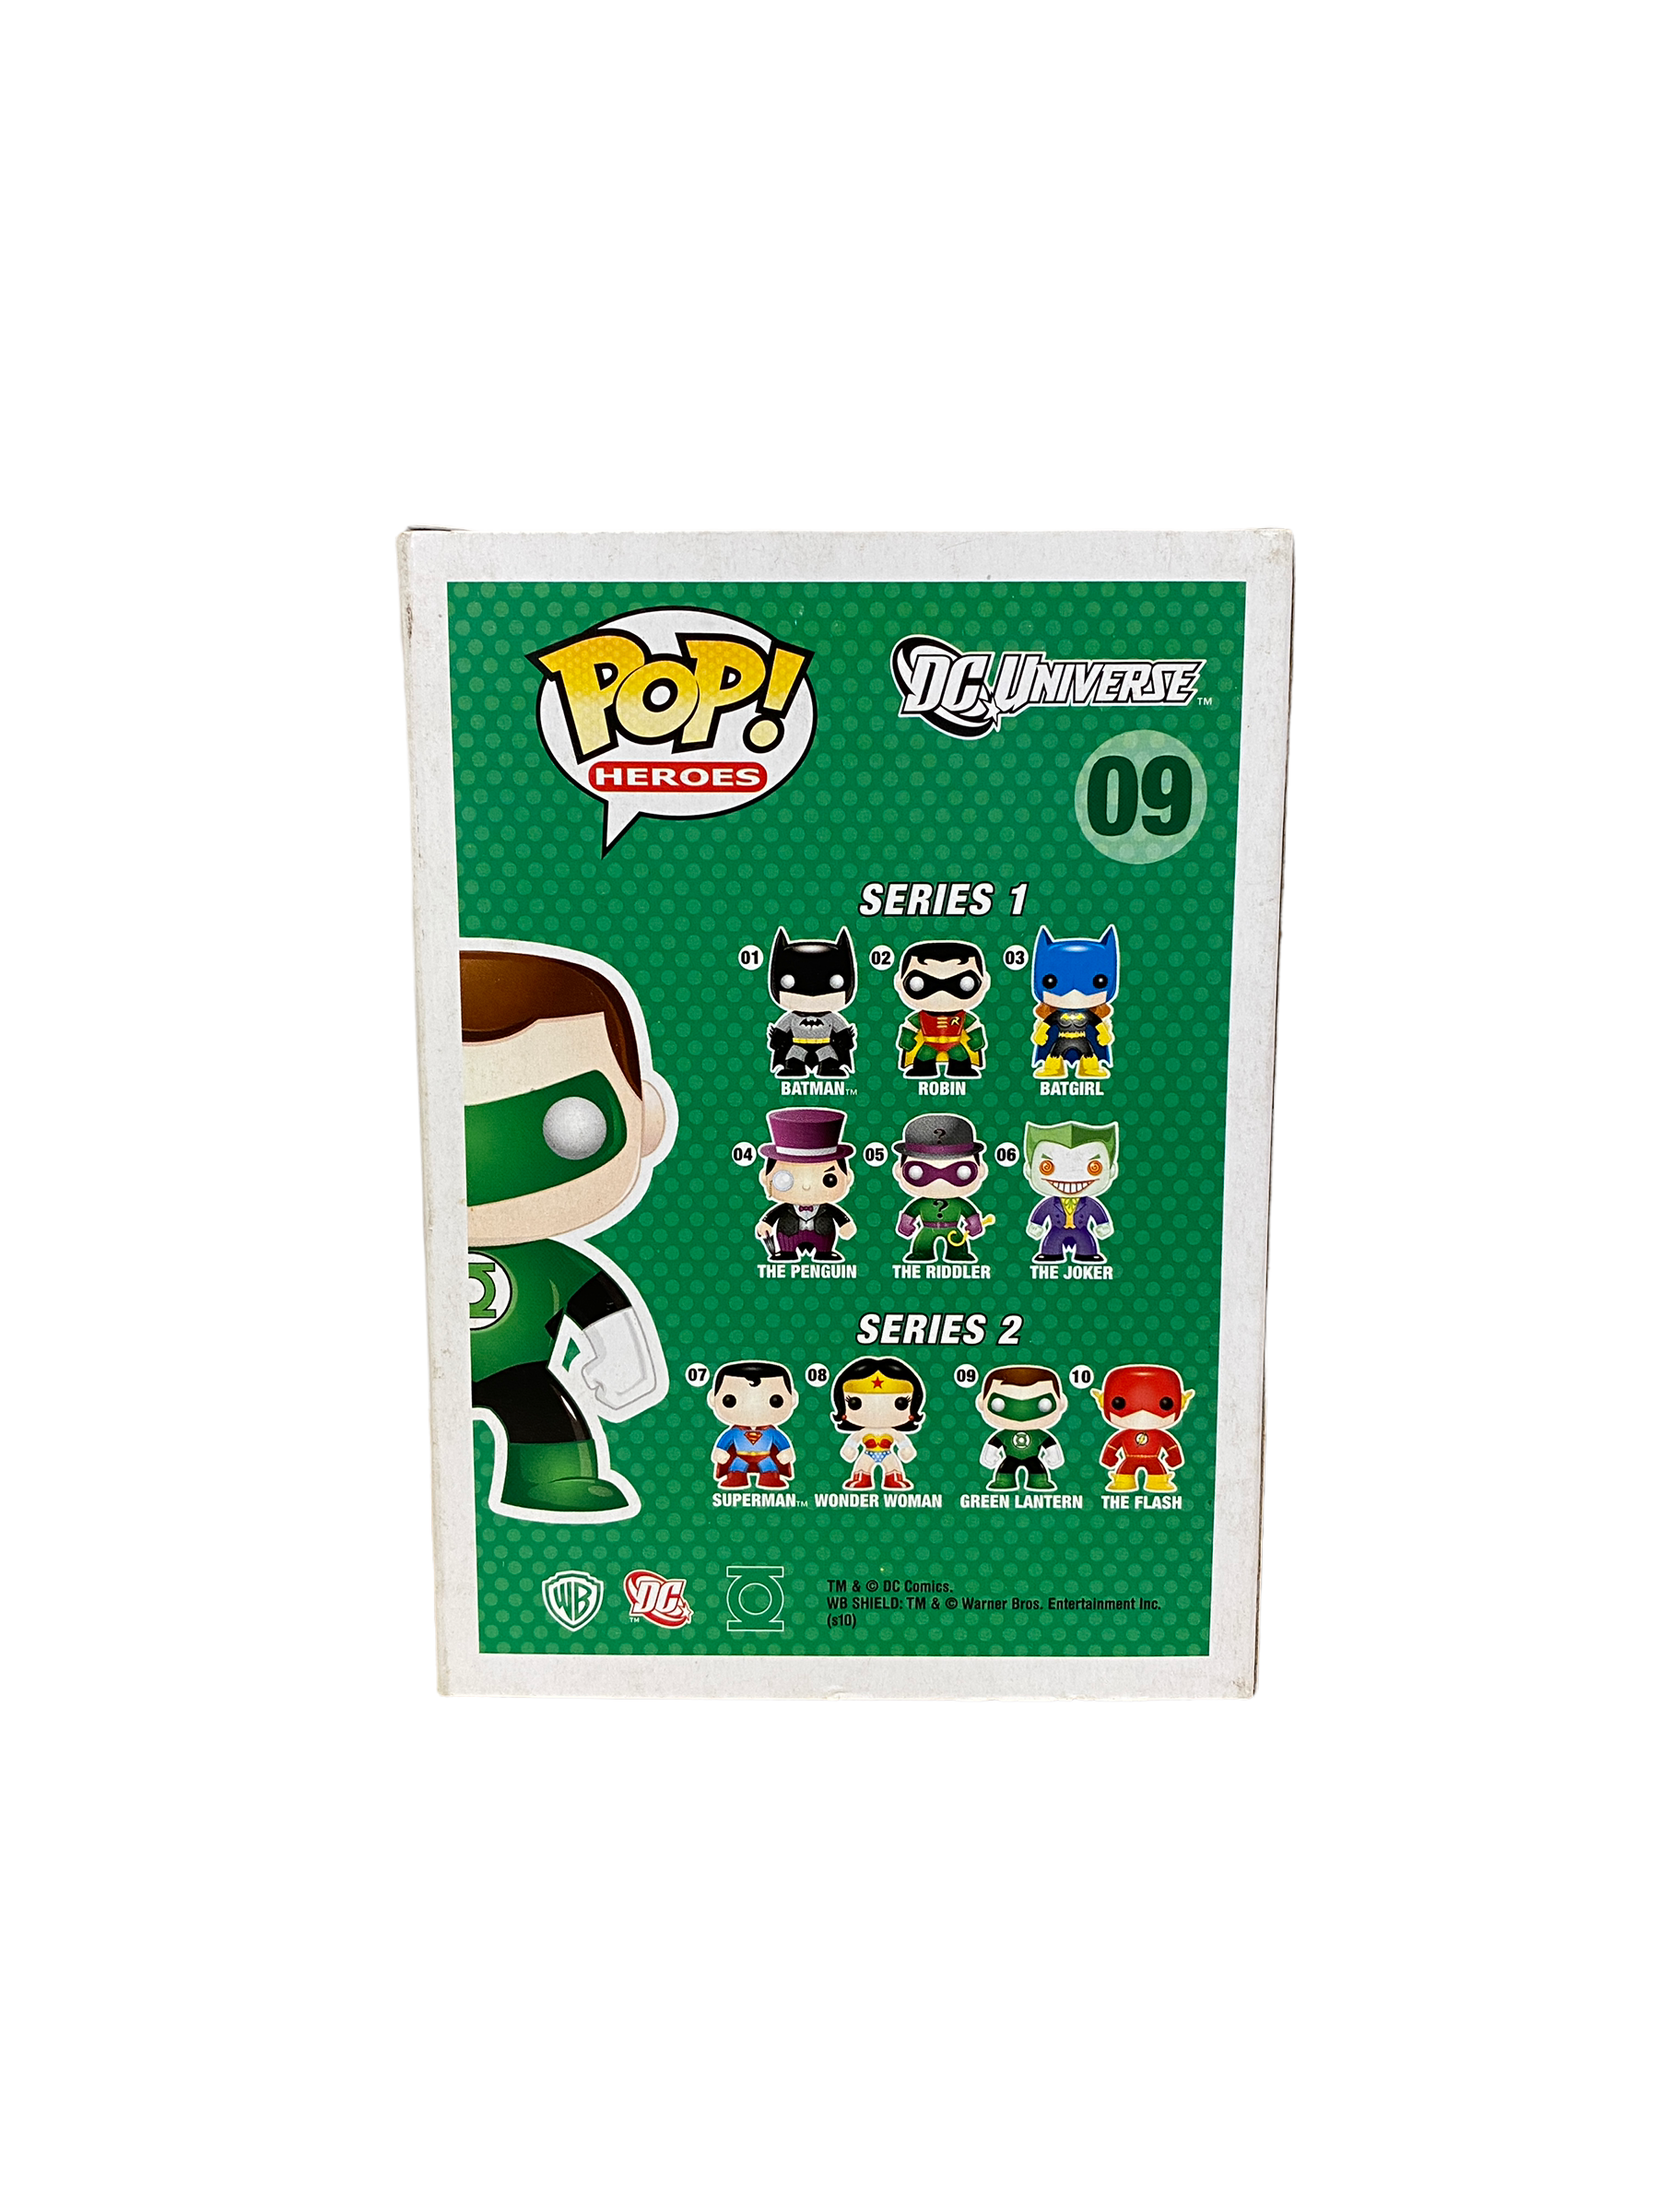 Green Lantern #09 (Glows In The Dark) Funko Pop! - DC Universe - SDCC 2010 Exclusive LE240 Pcs - (Clamshell Box Replacement) - Condition 8.5/10